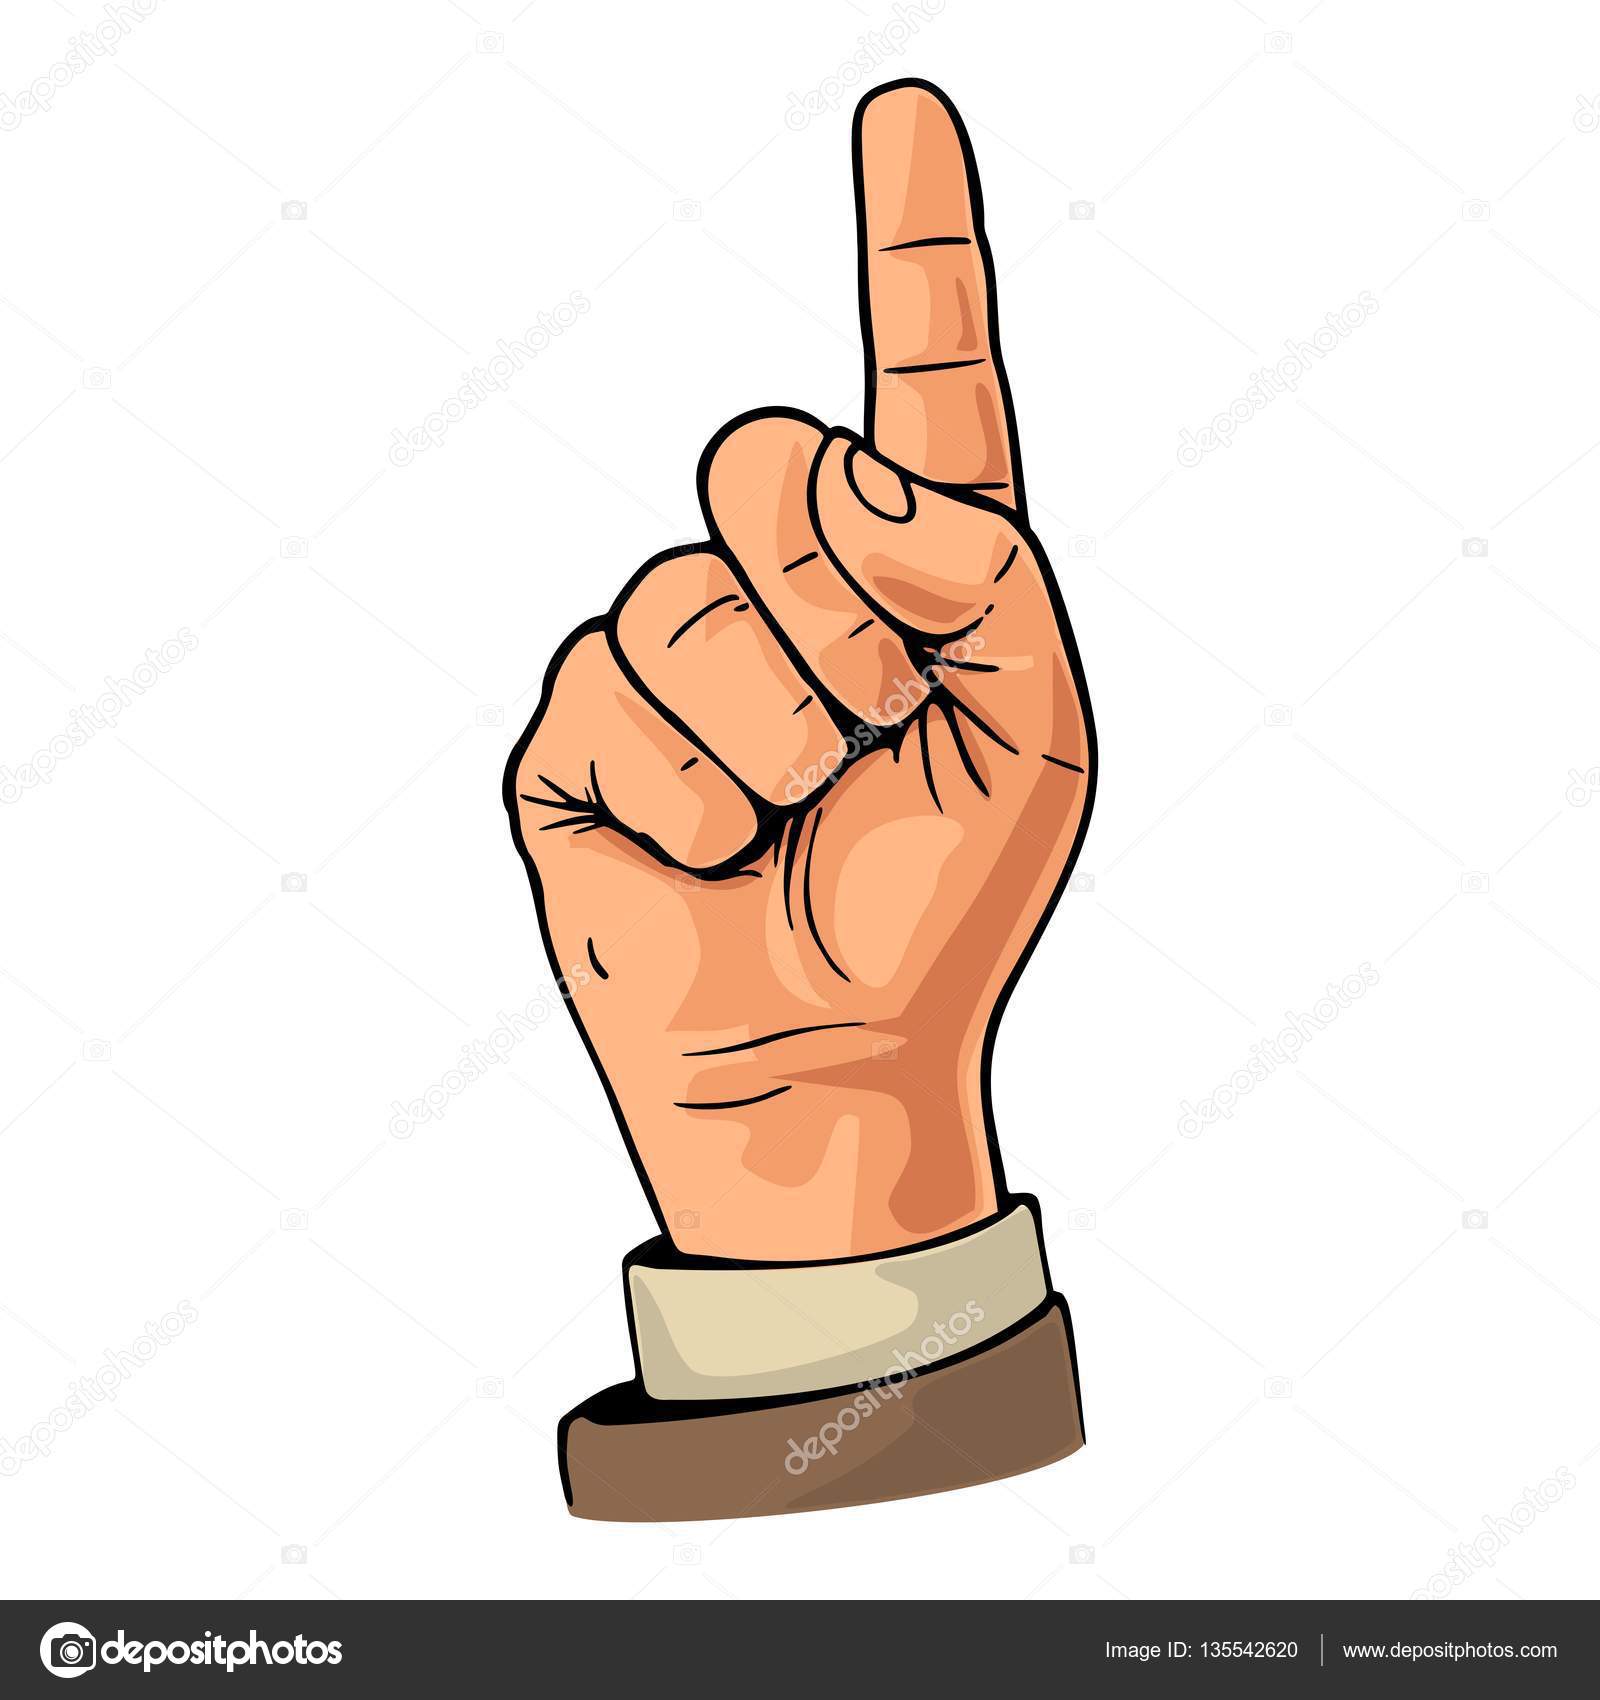 Finger sign number one Cut Out Stock Images & Pictures - Alamy